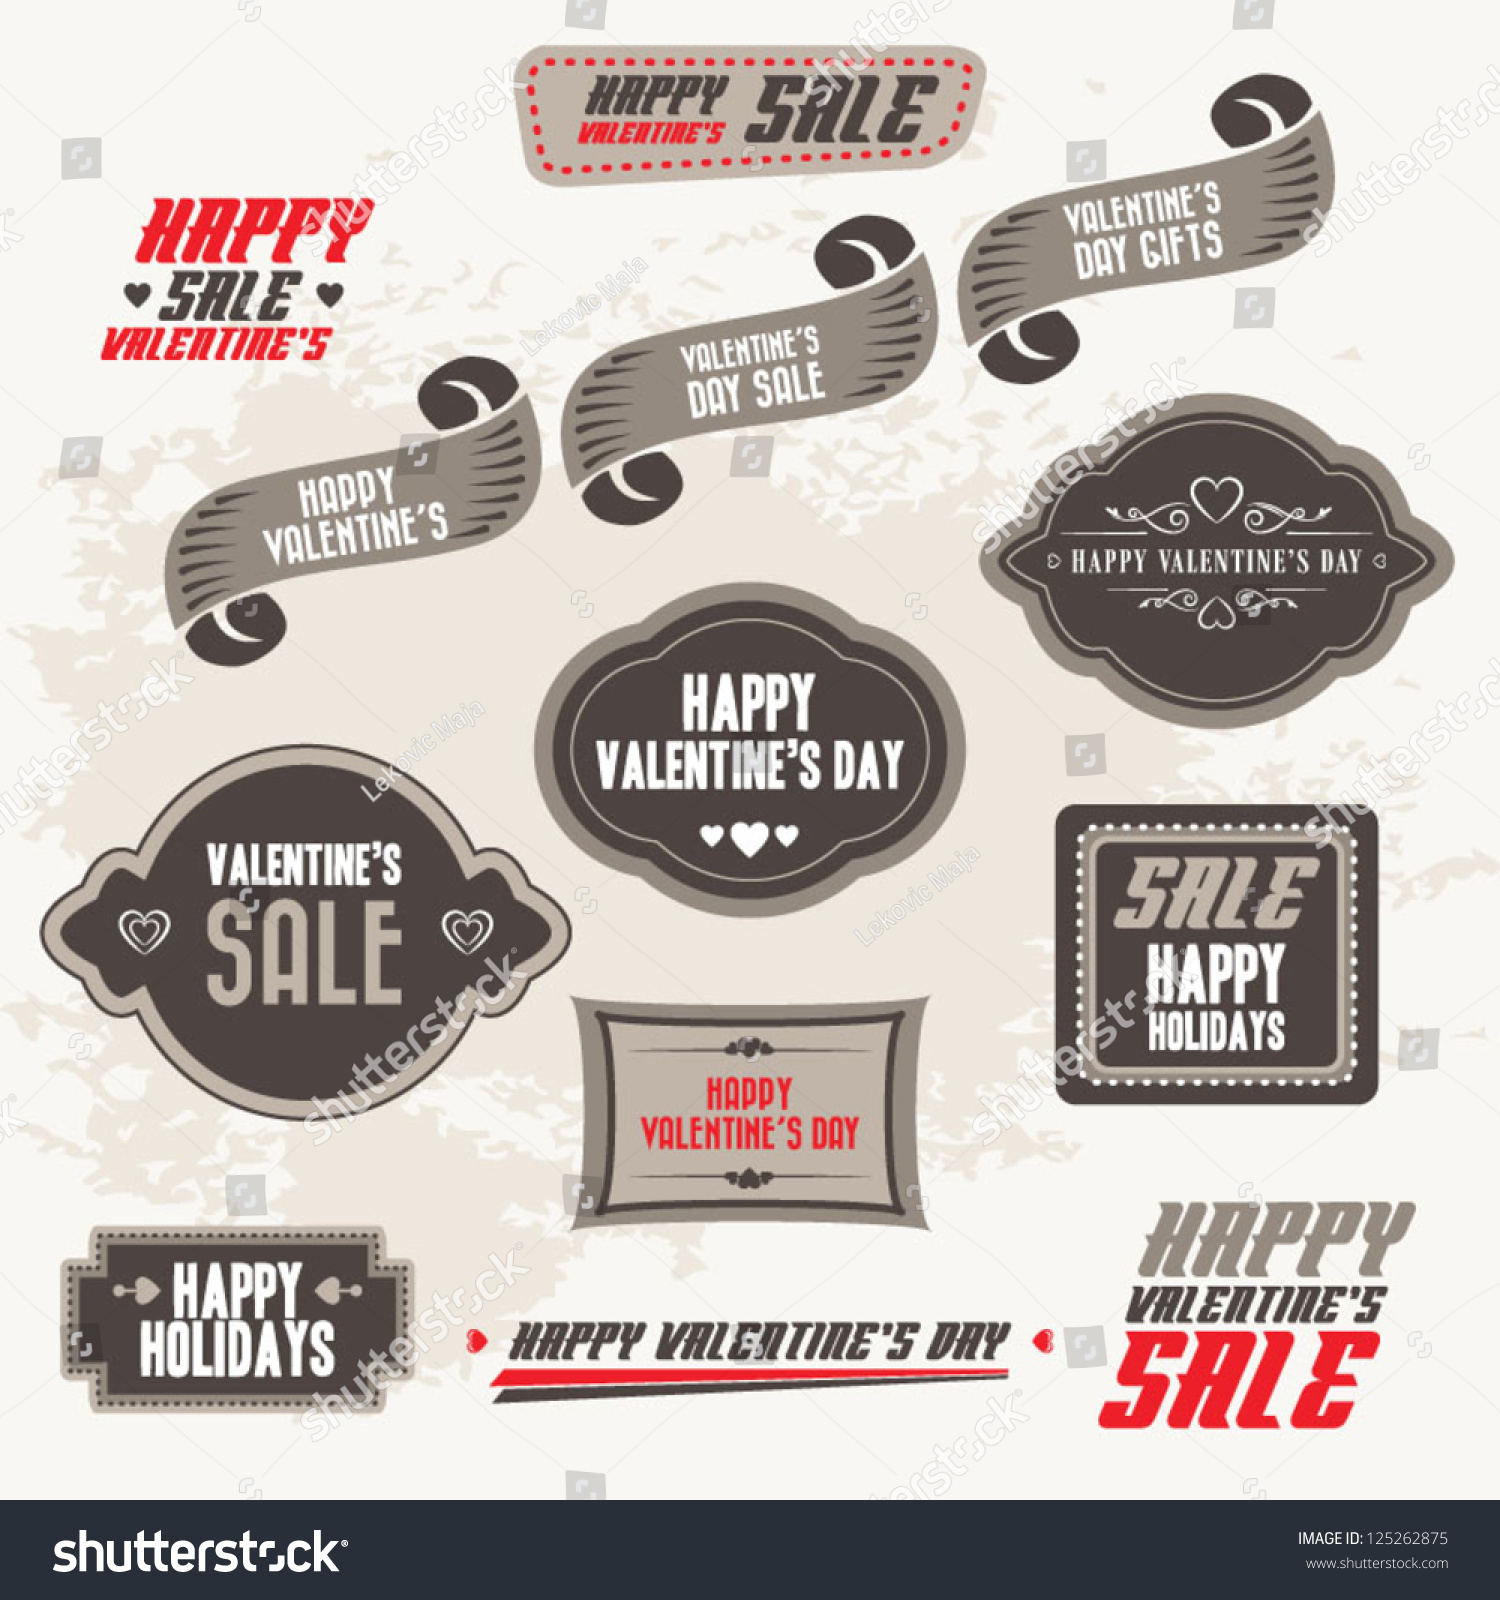 Set of Valentine's sale banners, frames, labels, ribbons, stickers and decorative ornaments #125262875